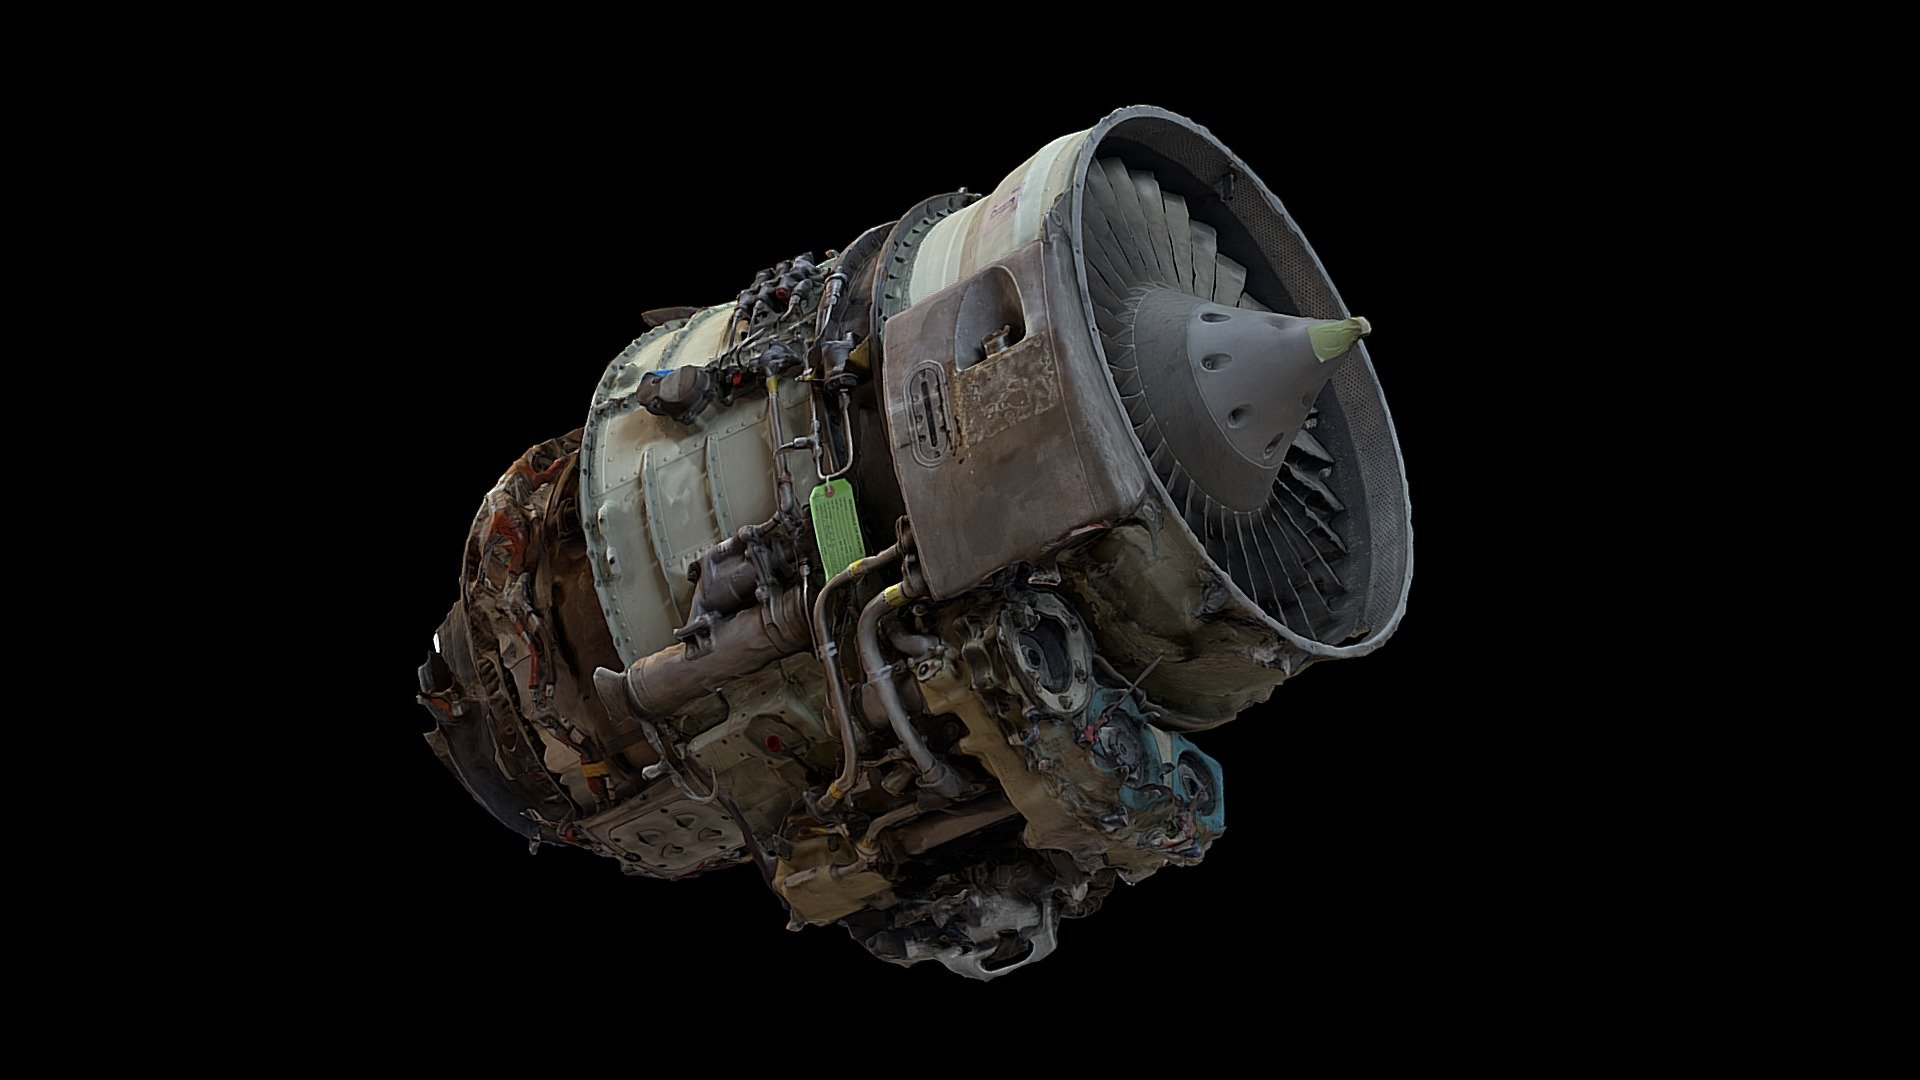 Scan of a jet turbine engine this is a raw scan and includes no cleanup. 

Perfect for kitbash!

Scanned with reality capture - Jet Engine Turbine Scan - Buy Royalty Free 3D model by Austin Beaulier (@Austin.Beaulier) 3d model